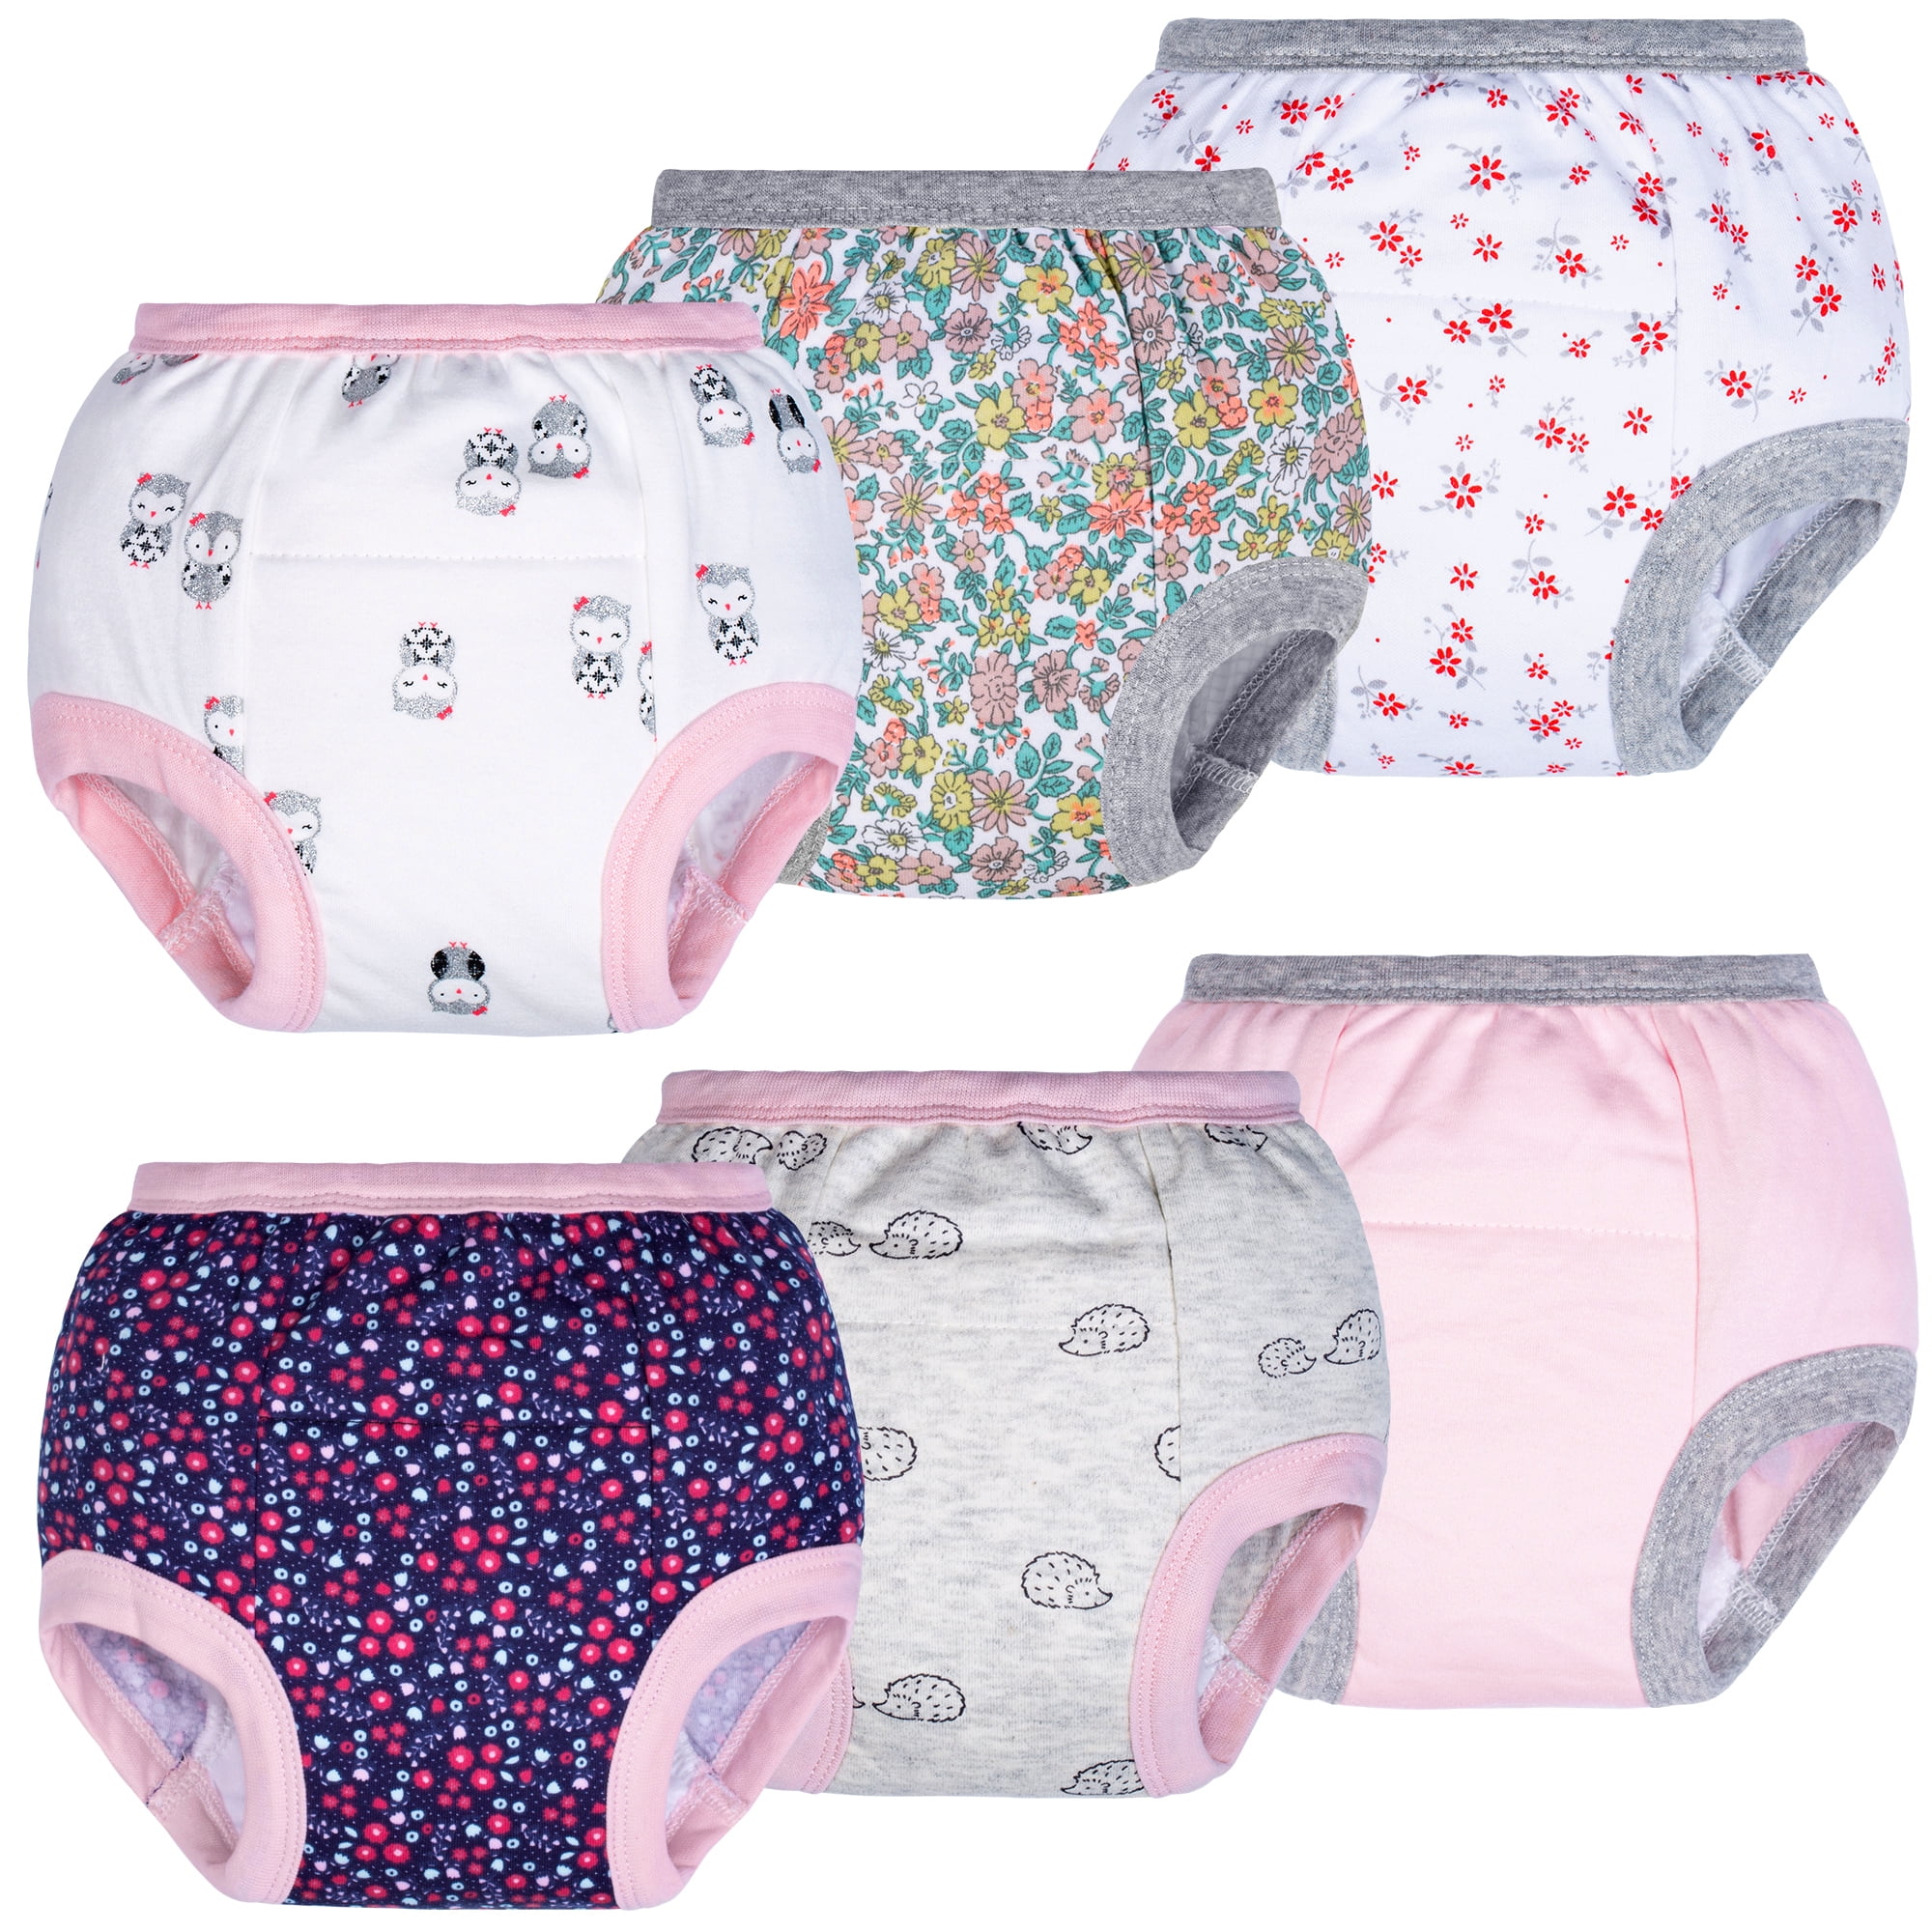  Baby Cotton Training Pants 4 Pack Padded Toddler Potty Training  Underwear for Girls 12M-4T (A, 3T) : Baby